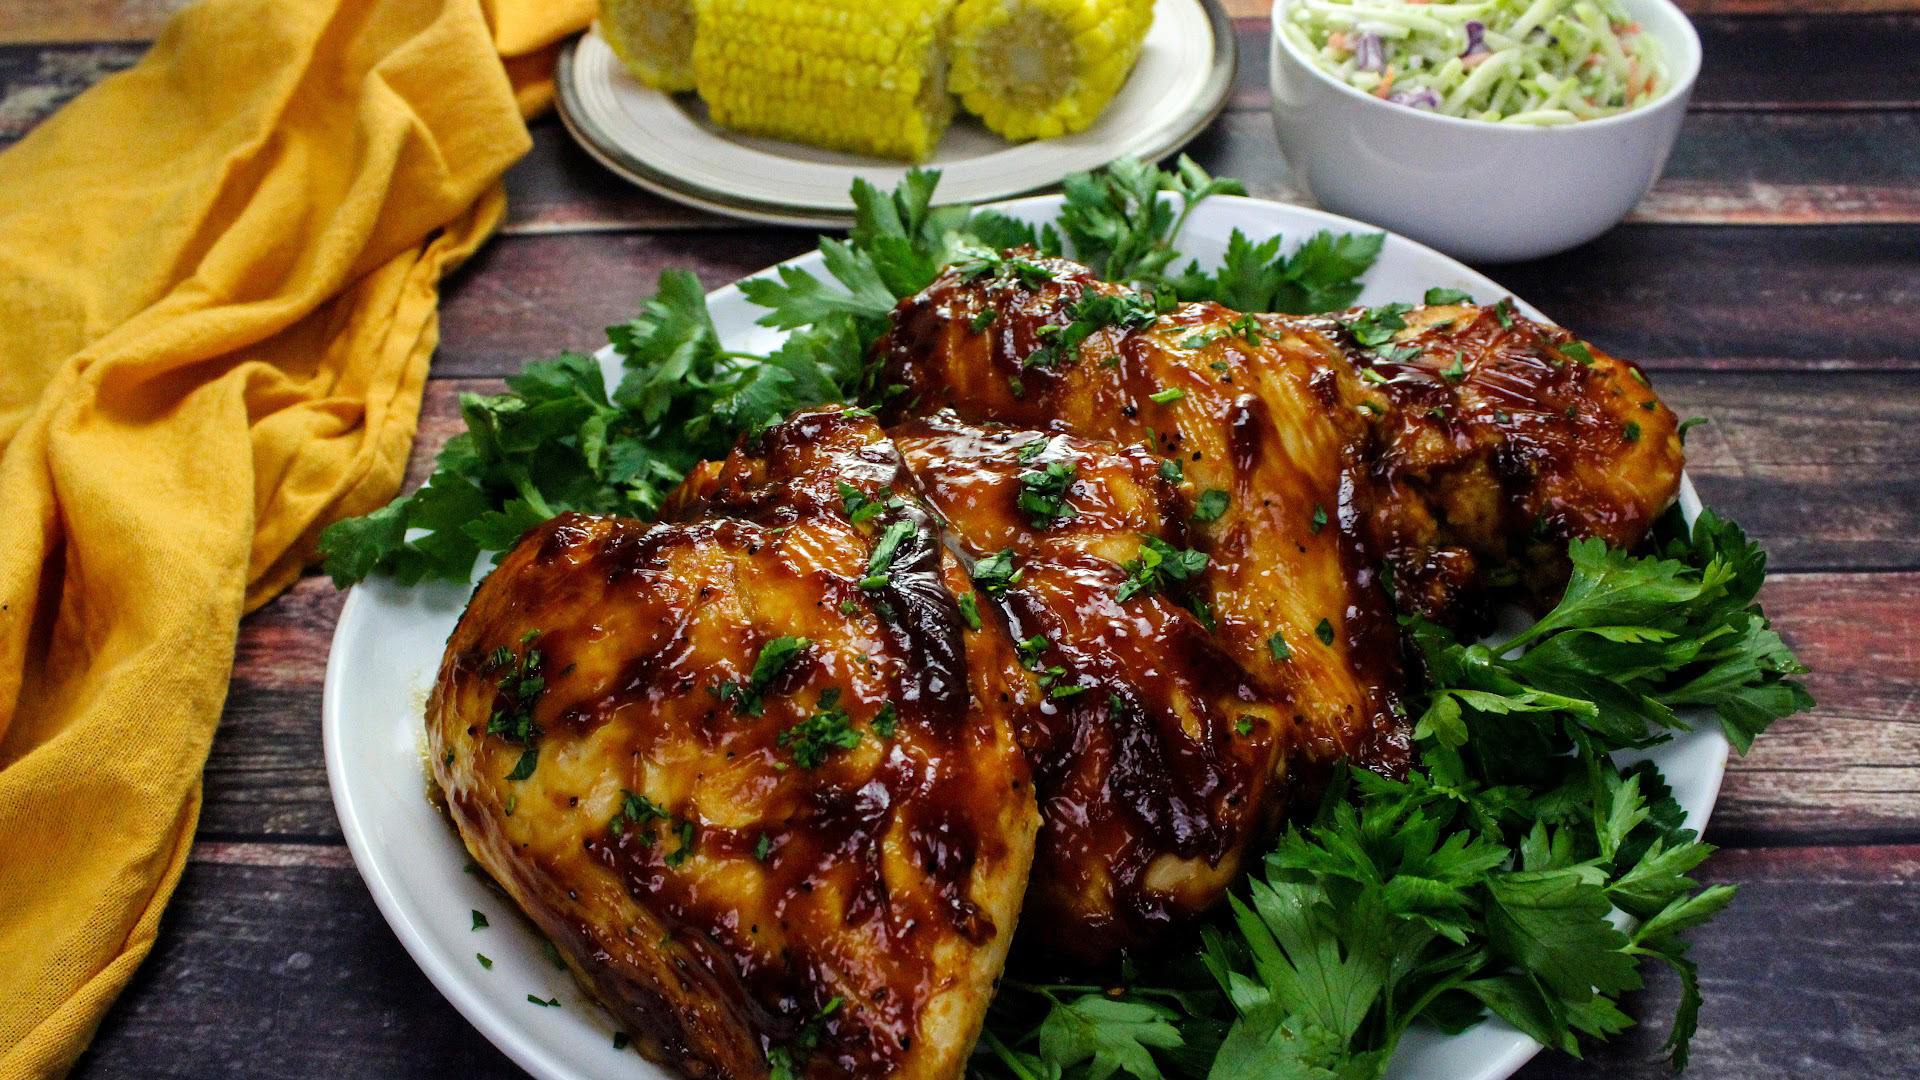 The Recipe Fits Its Name! Super Moist Oven Baked Bbq Chicken